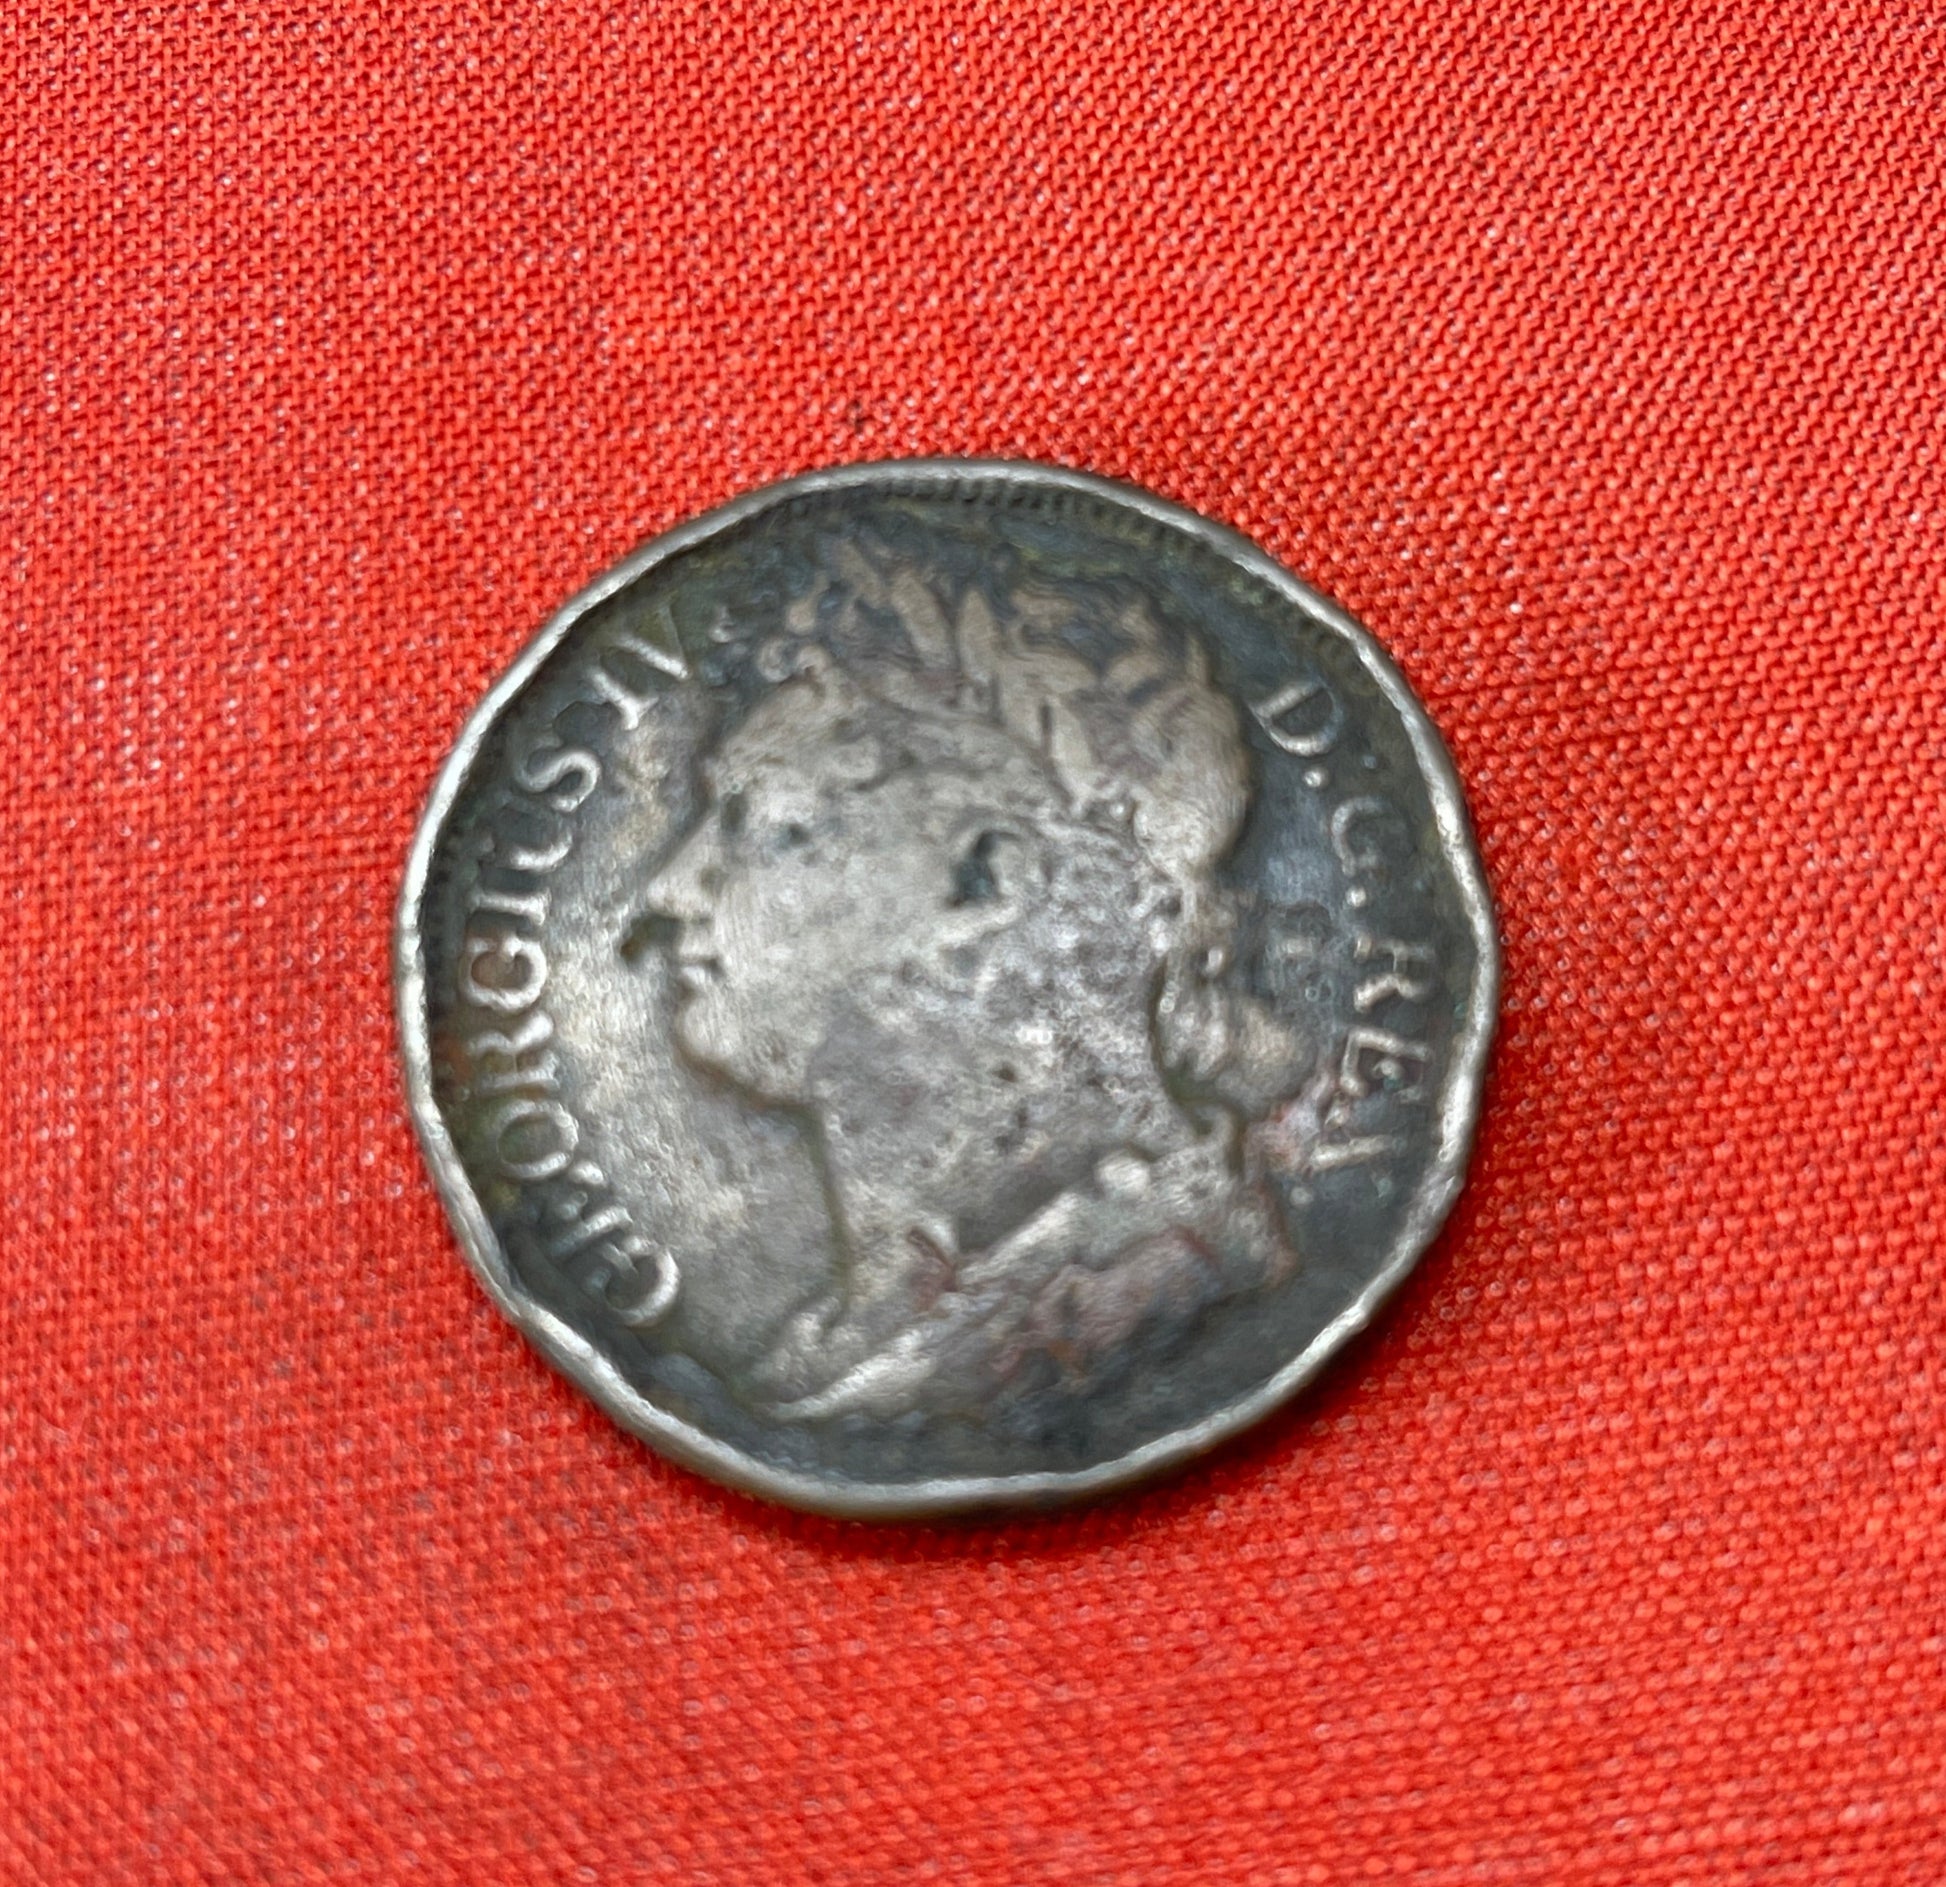 On the obverse side of the coin, you would find the portrait of King George IV. The specific design of the 1826 Farthing featured a bust of the King facing right. King George IV is depicted wearing a laurel wreath around his head, and the inscription "GEORGIUS IIII D.G. BRITANNIAR. REX F.D." can be seen around the portrait, which translates to "George IV, by the Grace of God, King of the Britains, Defender of the Faith."